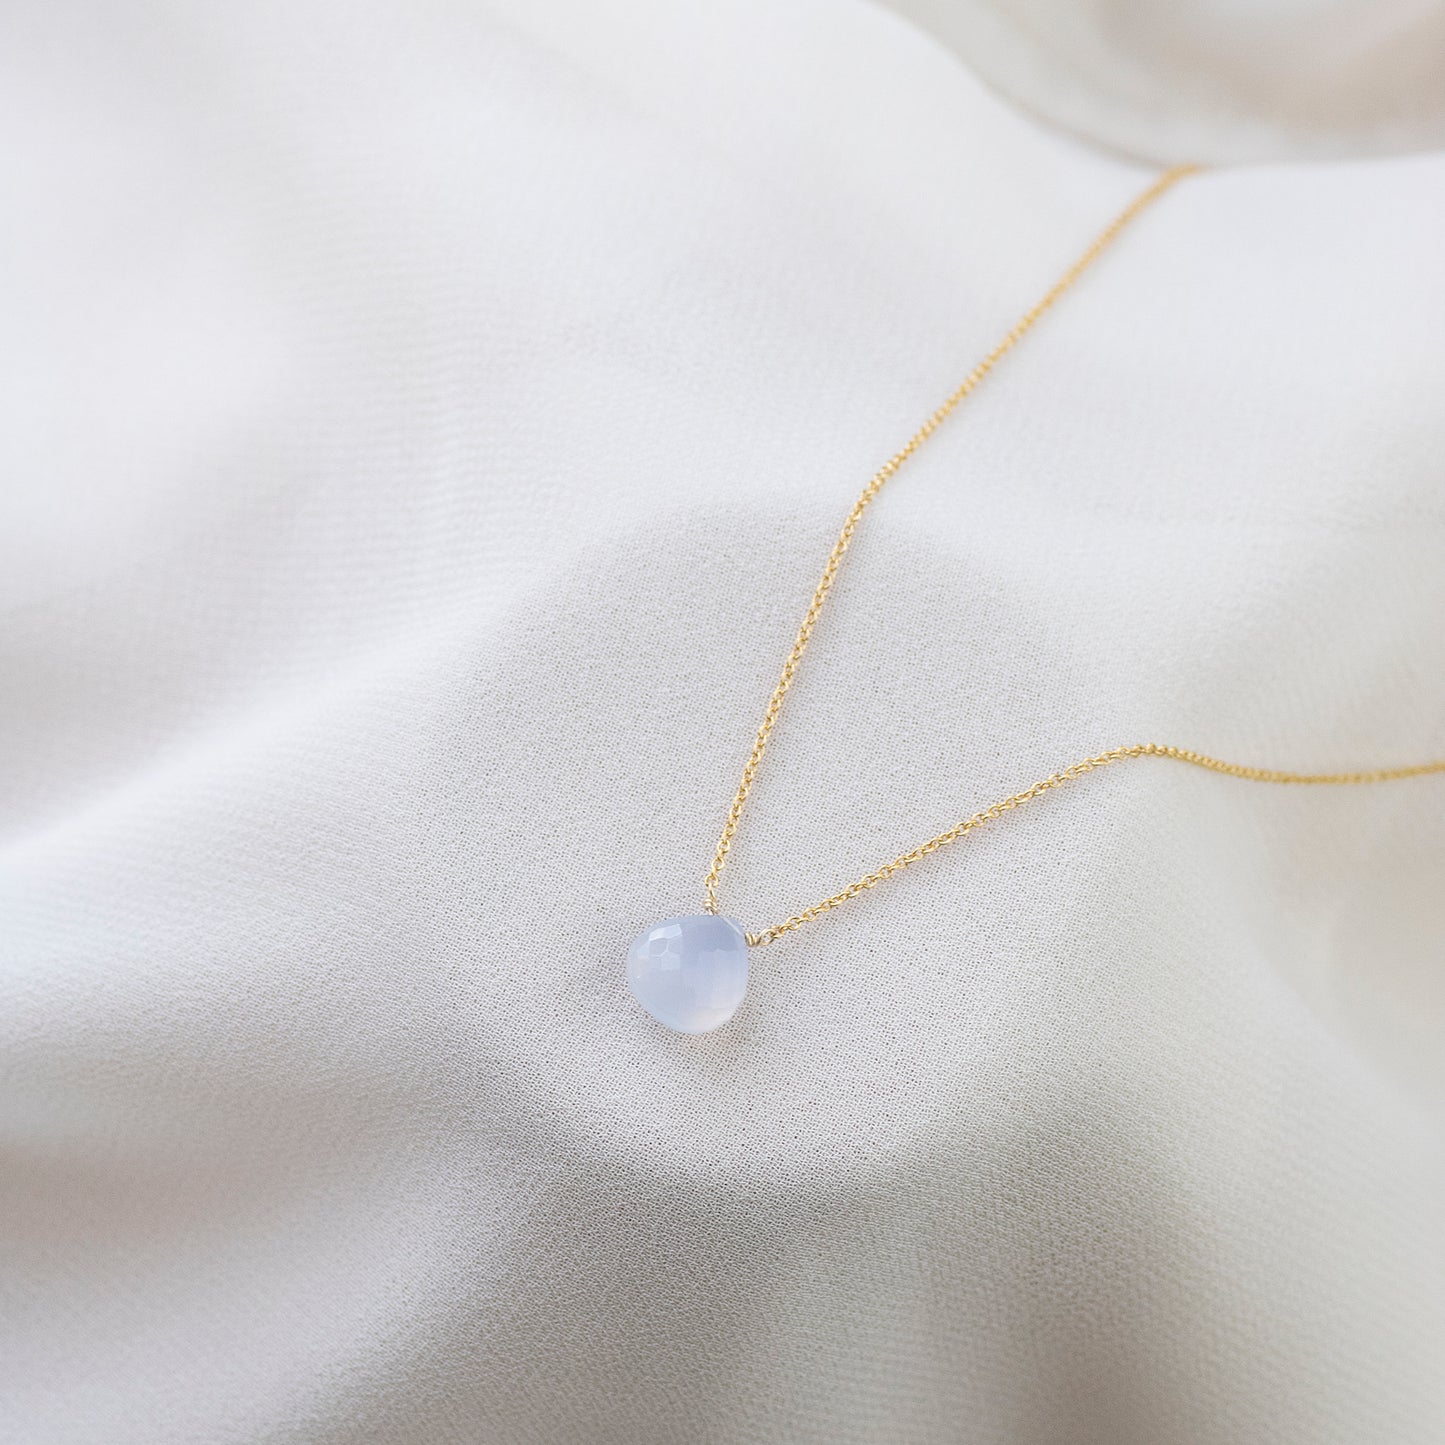 Blue Chalcedony Necklace - Silver & Gold